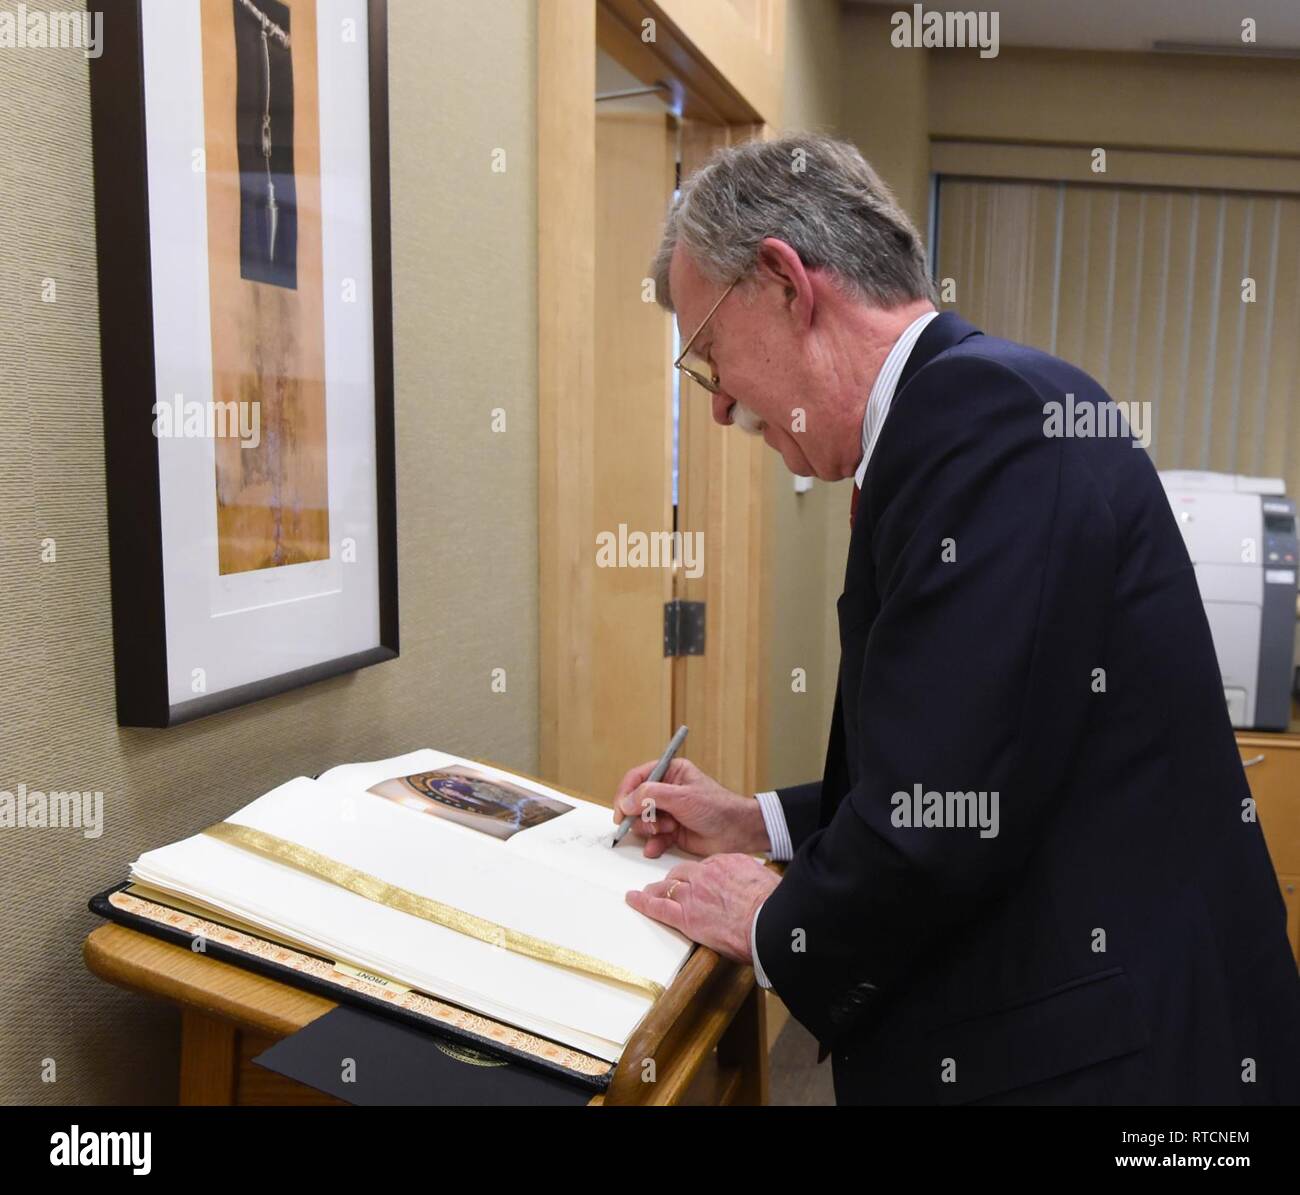 Ambassador John Bolton, National Security Advisor, signs the commander’s guest book during his visit to USSTRATCOM at Offutt Air Force Base, Neb., Feb. 14, 2019. The Ambassador observed USSTRATCOM’s combat-ready force, engaged in discussions with senior leaders and thanked warfighters for their service to the nation. Bolton’s visit also highlighted USSTRATCOM’s critical role in the National Security Strategy. Stock Photo